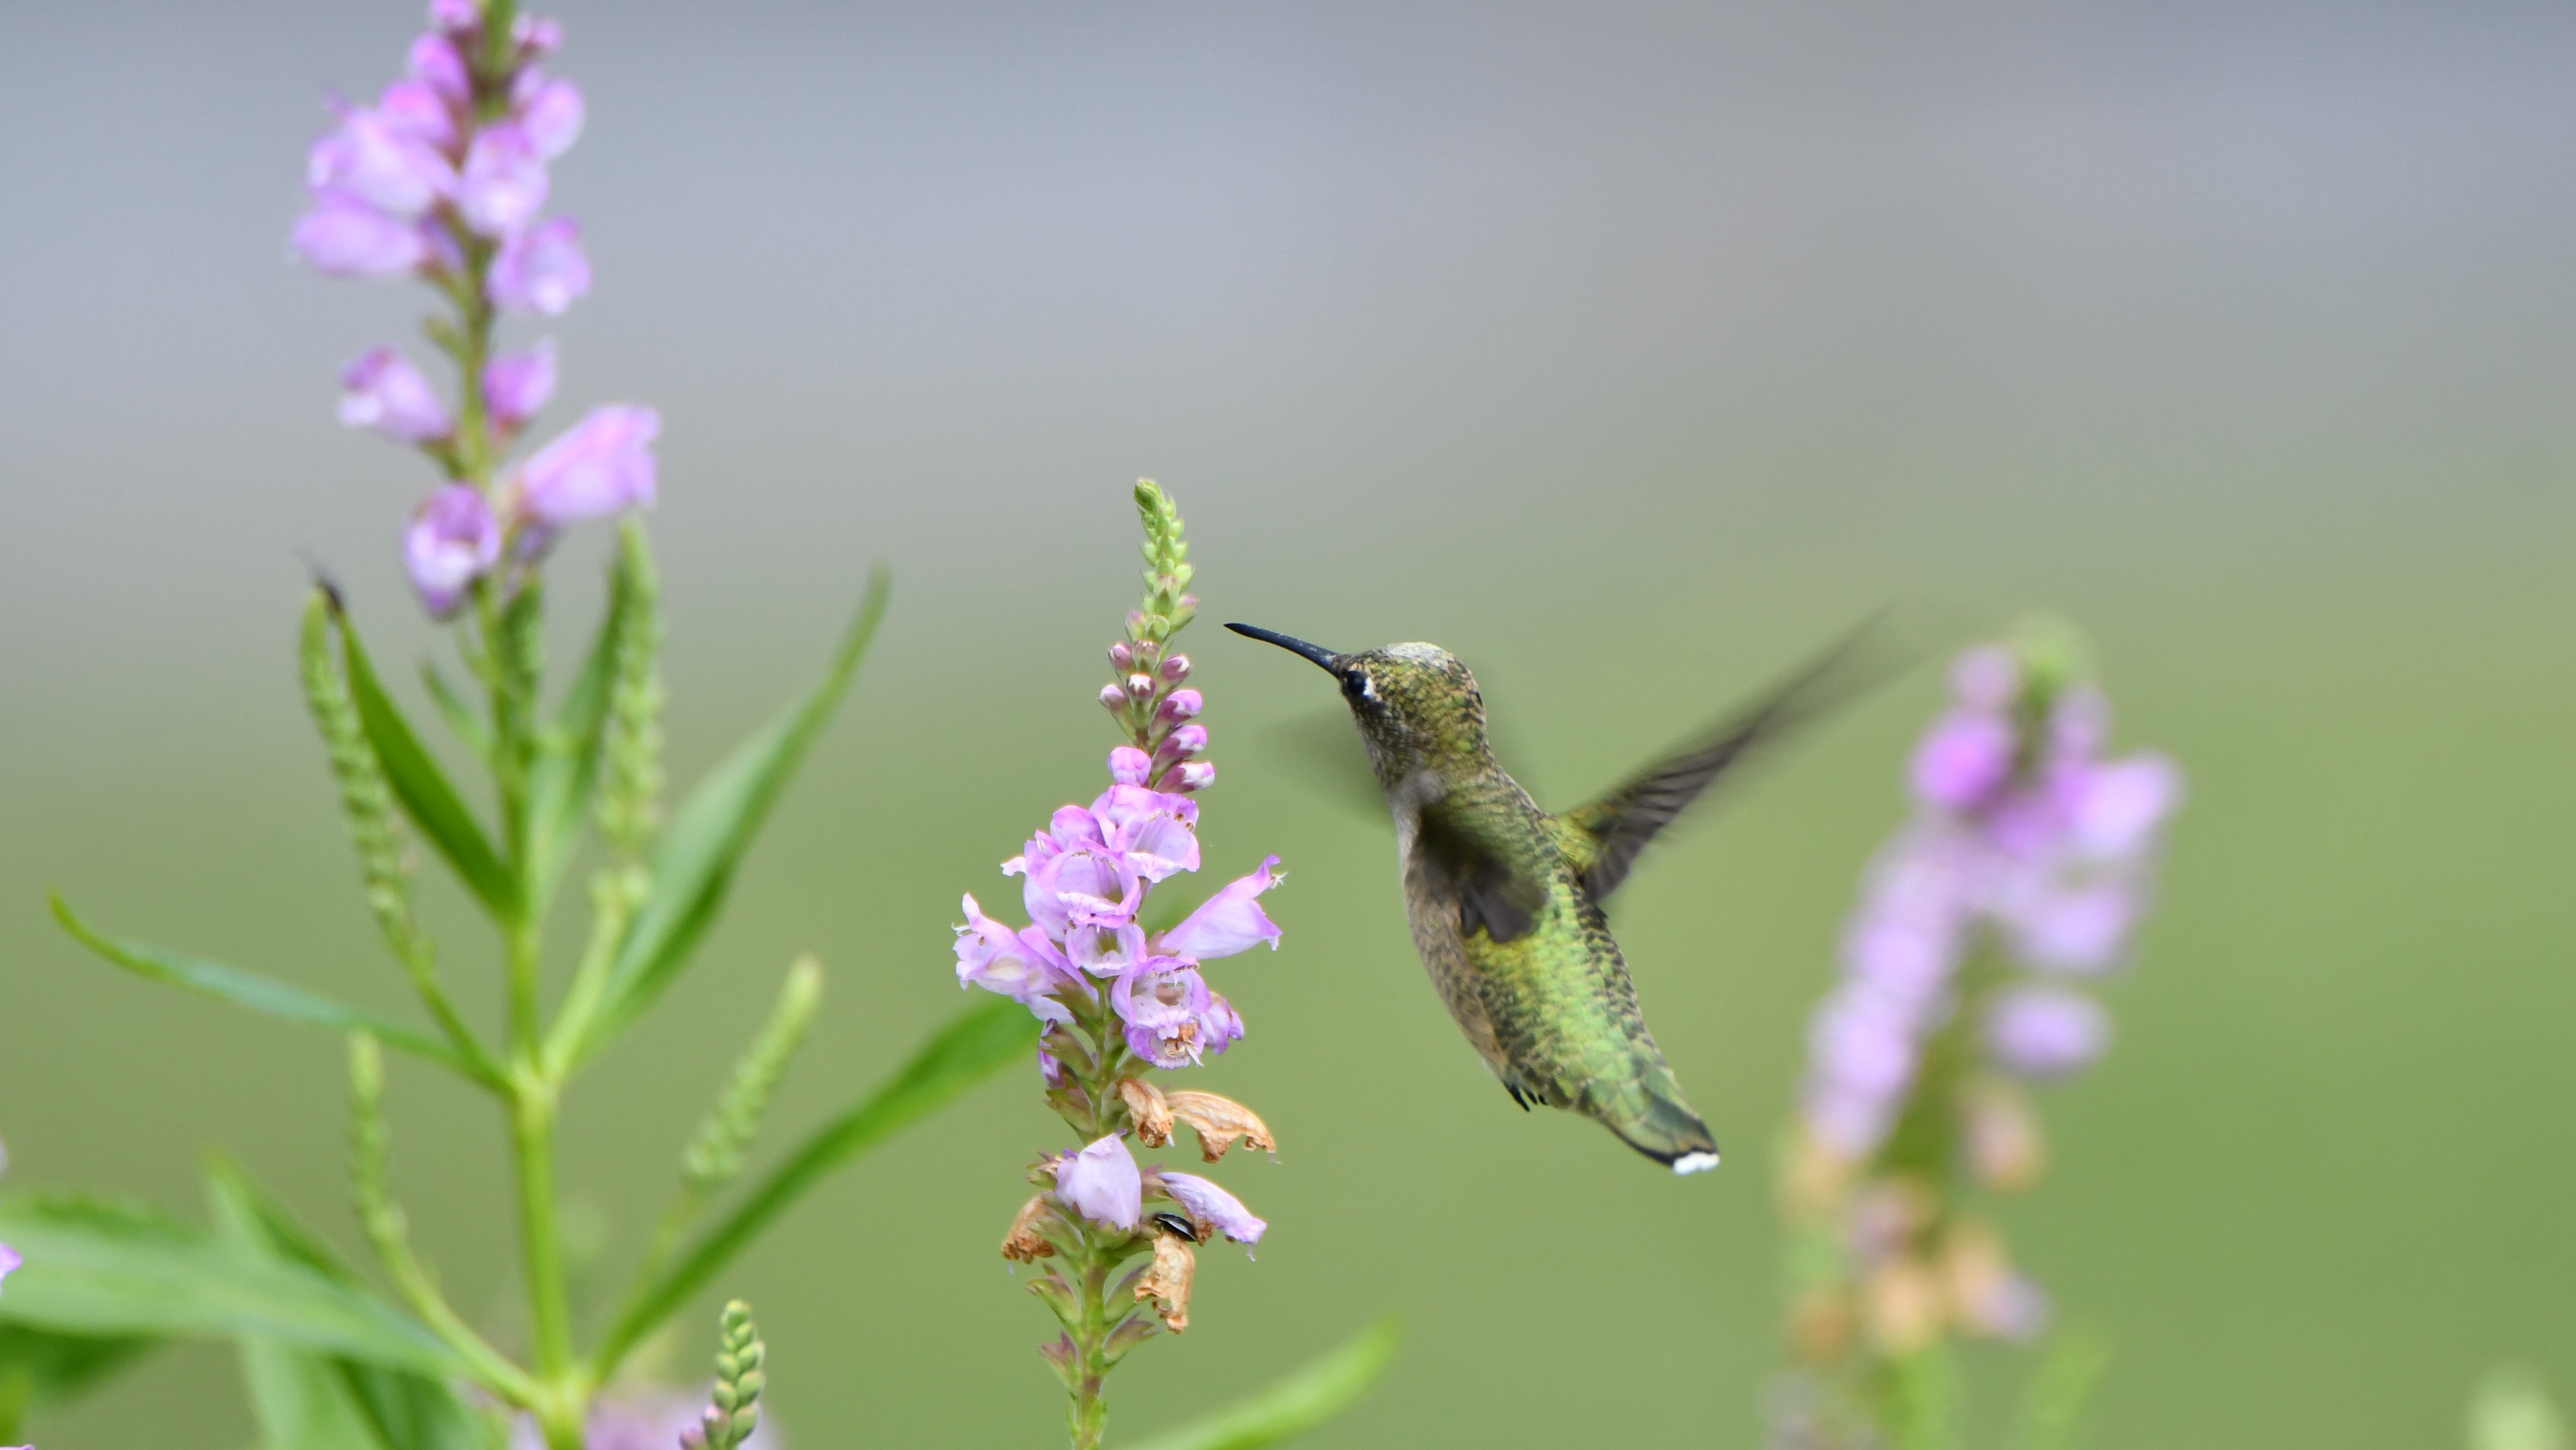 A ruby-throated hummingbird sipping nectar from obedient plants.